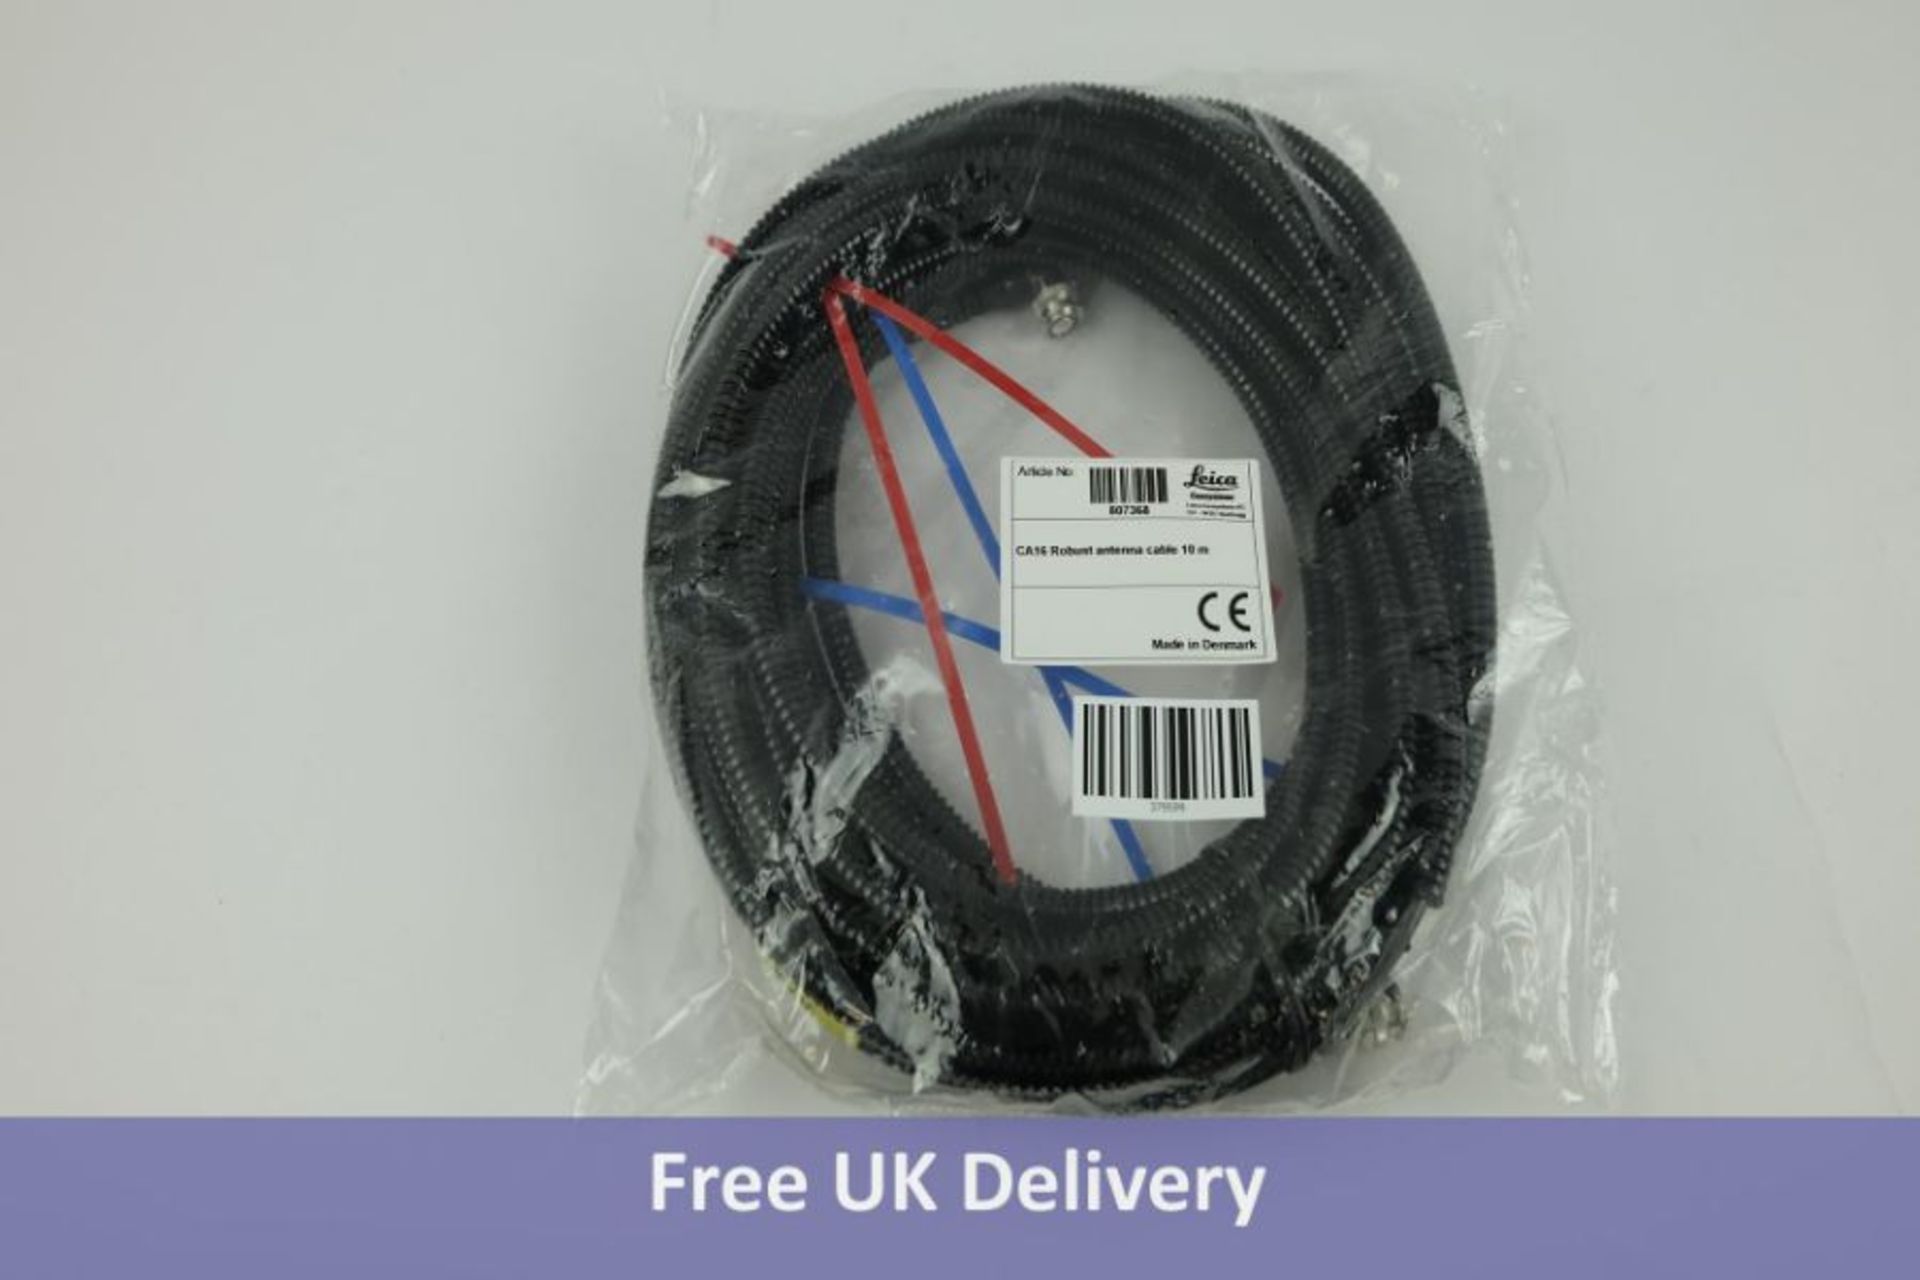 Leica ca16 Robust Antenna Cable 10m, Article No. 807368